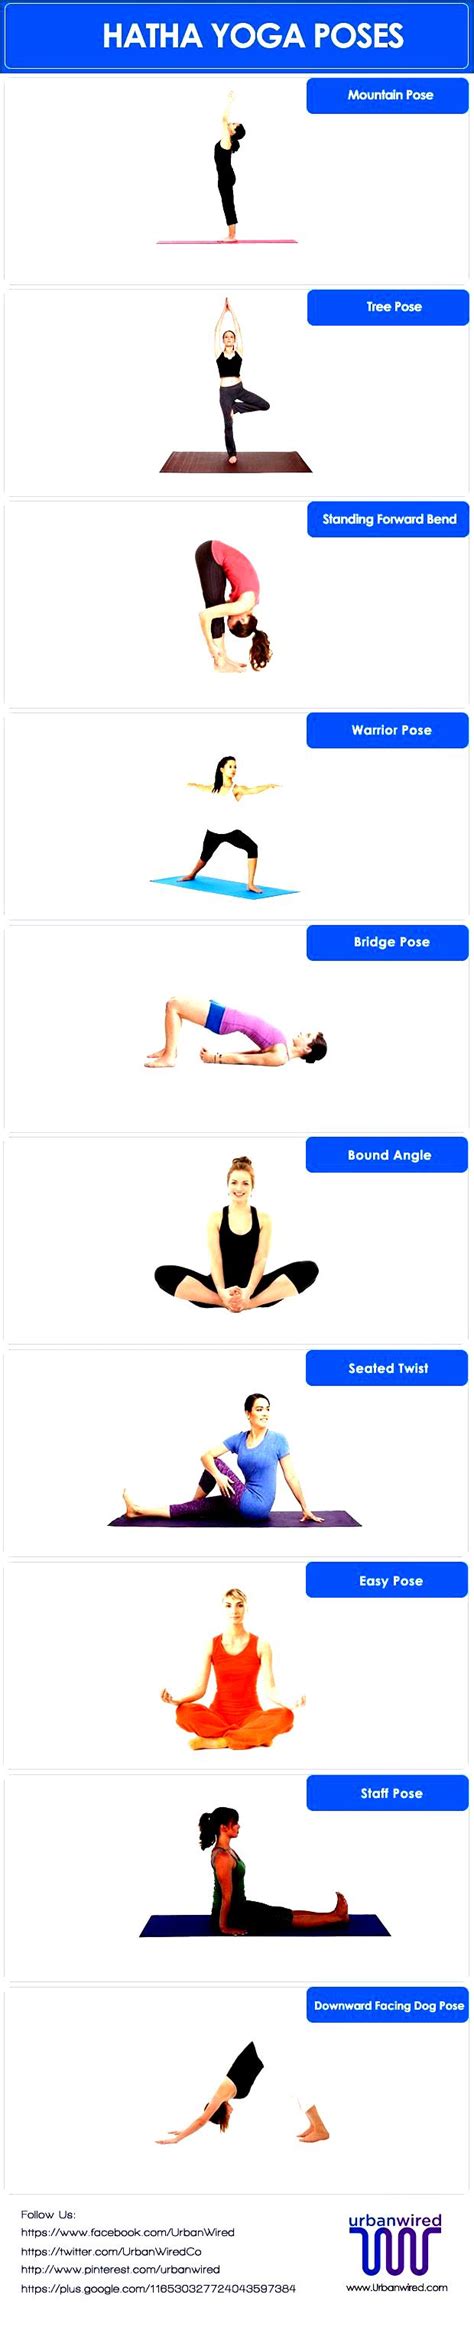 basic hatha yoga poses work  picture media work  picture media